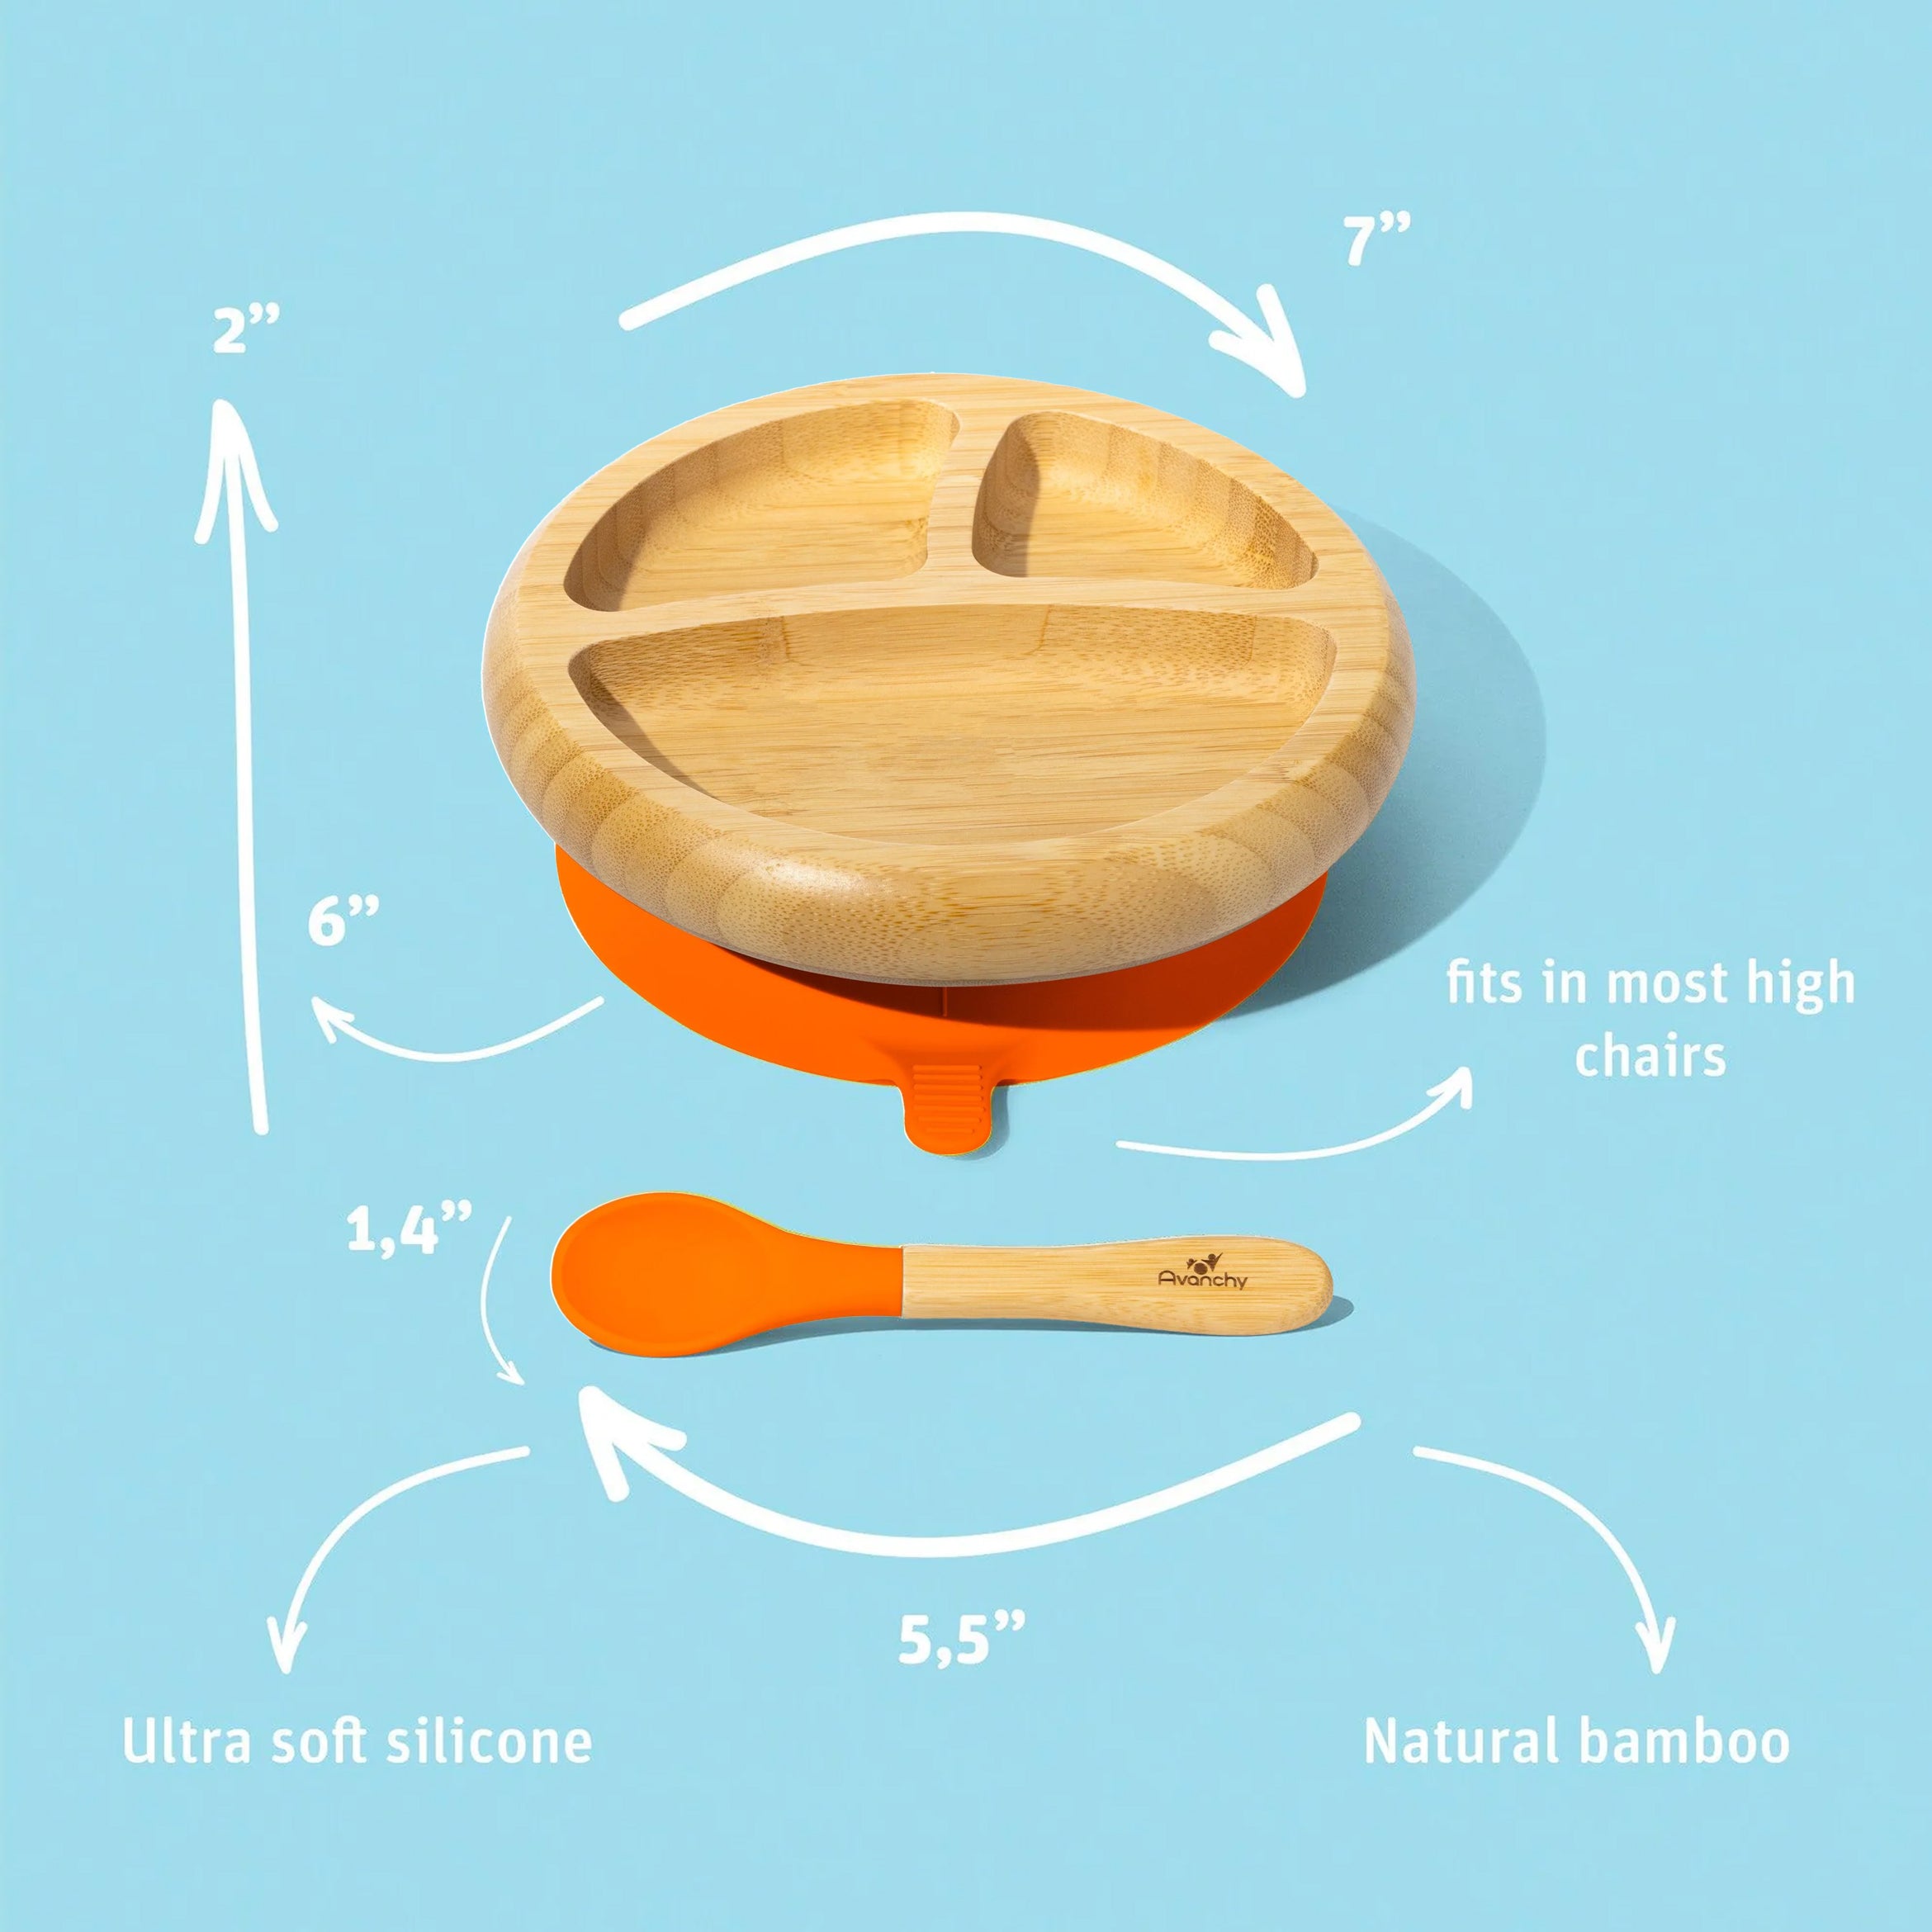 avanchy-bamboo-suction-classic-plate-spoon-og